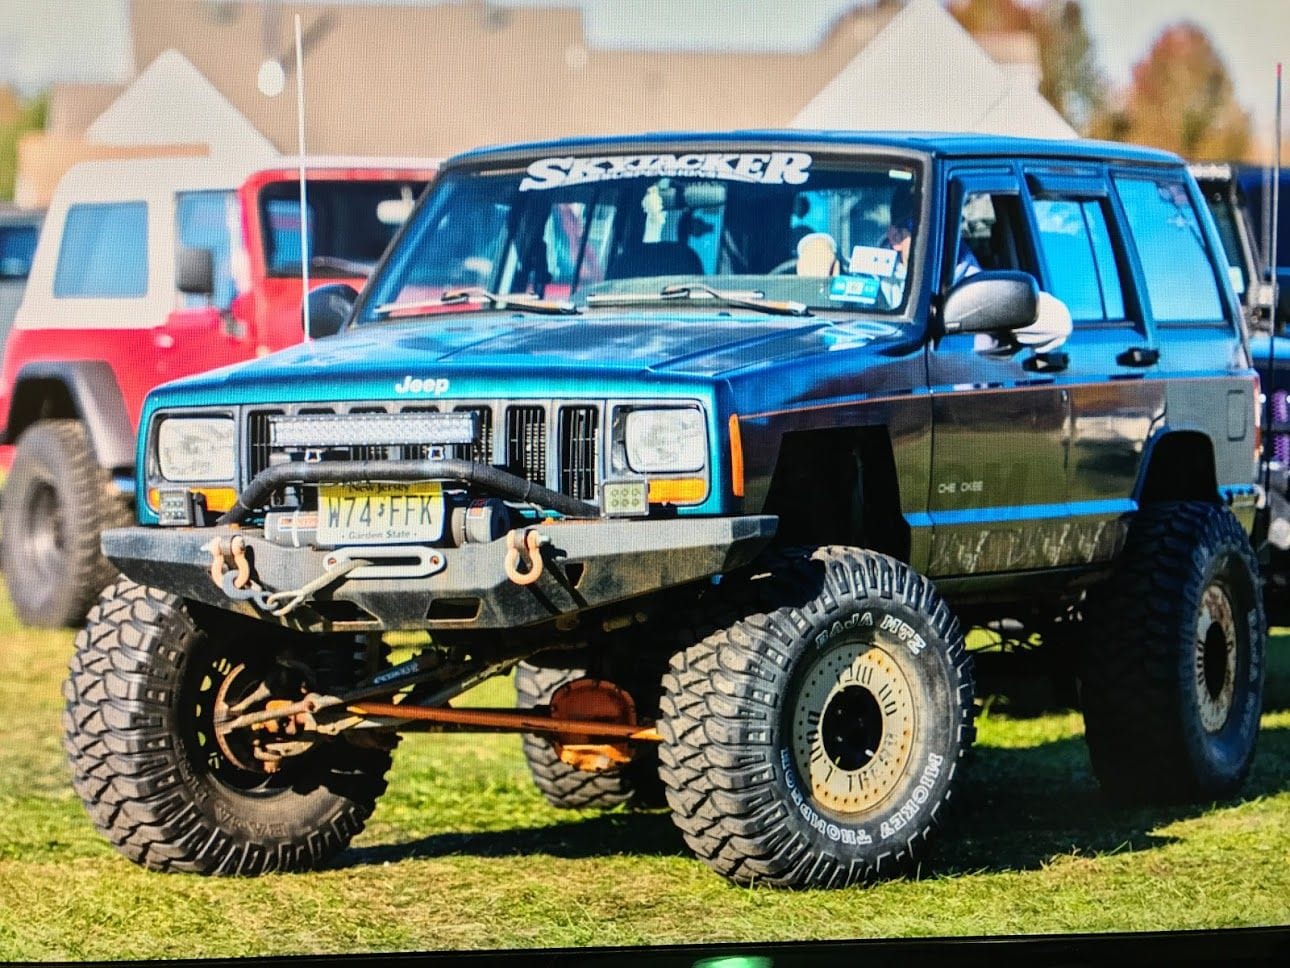 Legit XJ daily drivers, lets see em! - Page 16 - Jeep ...